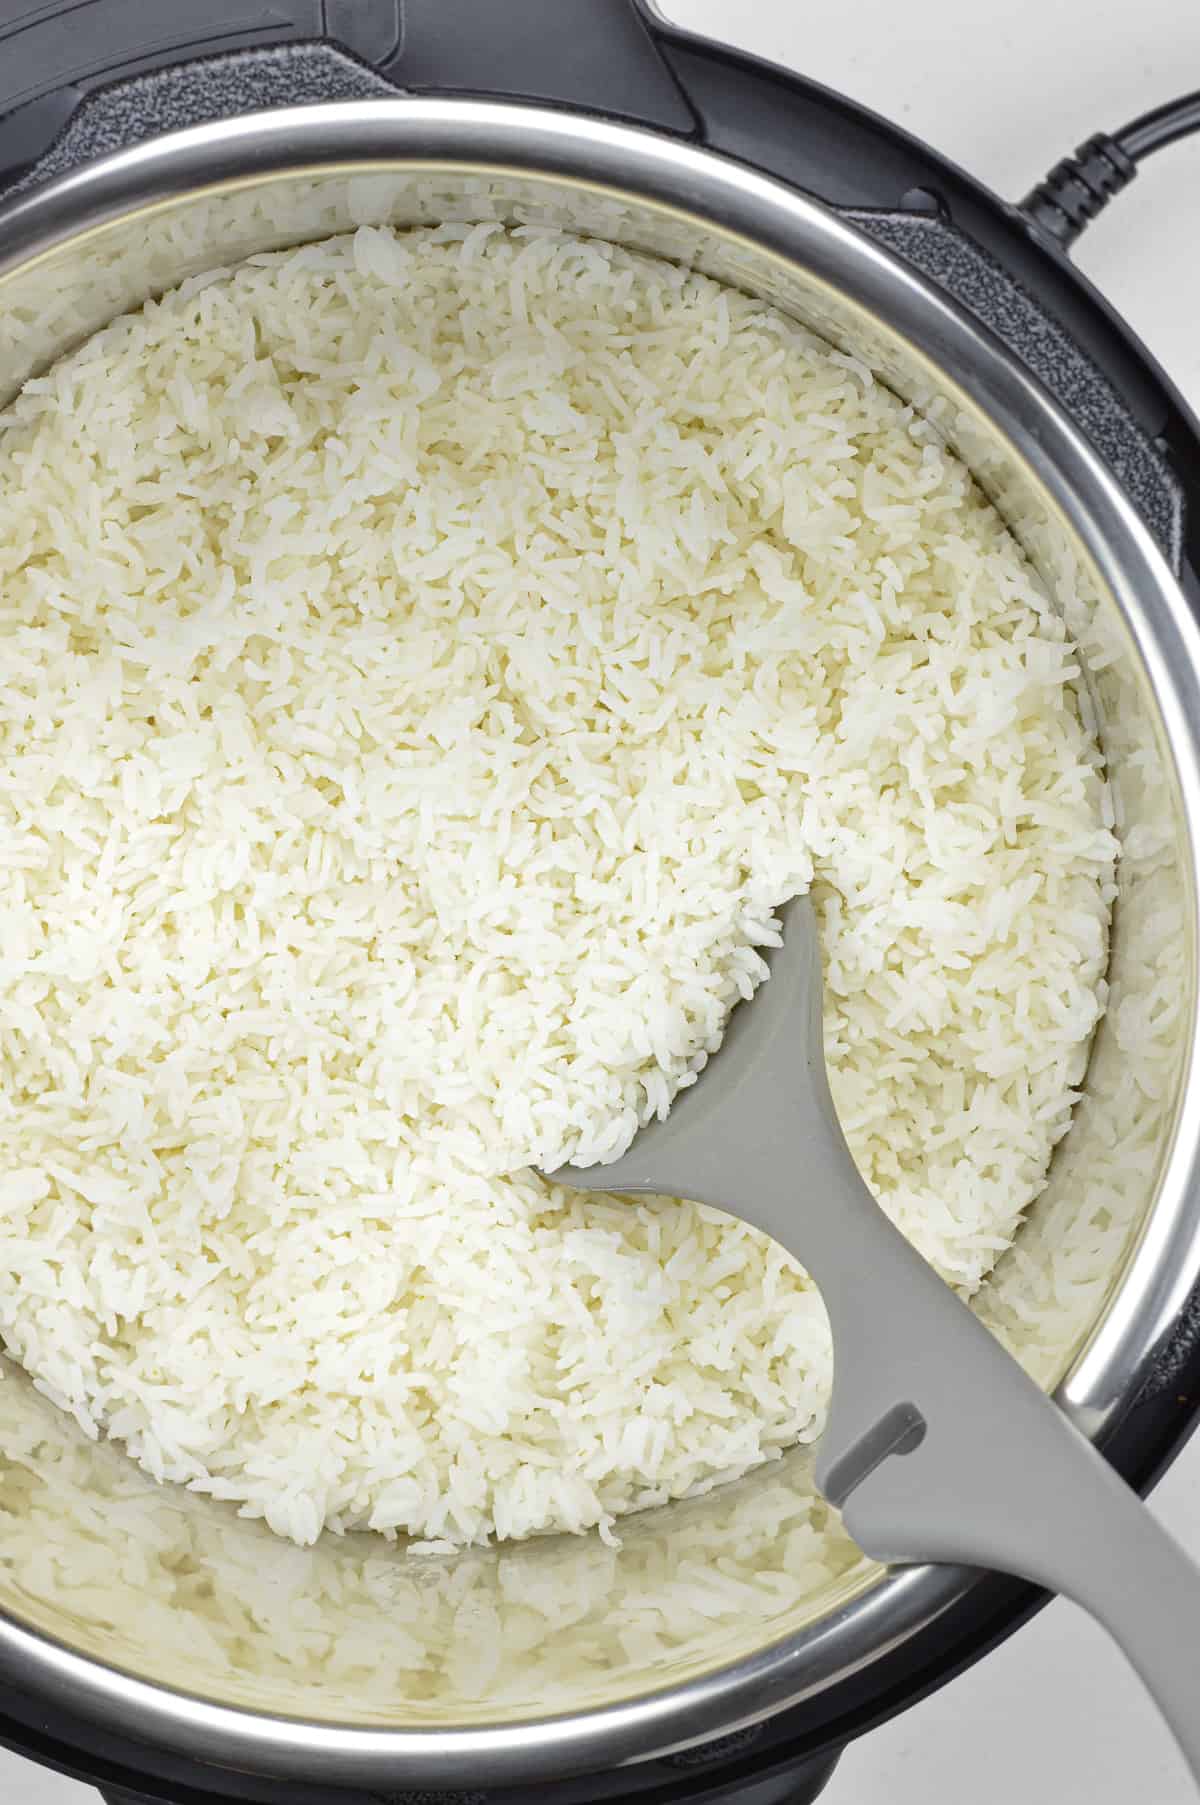 How Long Do I Cook 6 Cups Of Rice In An Electric Pressure Cooker